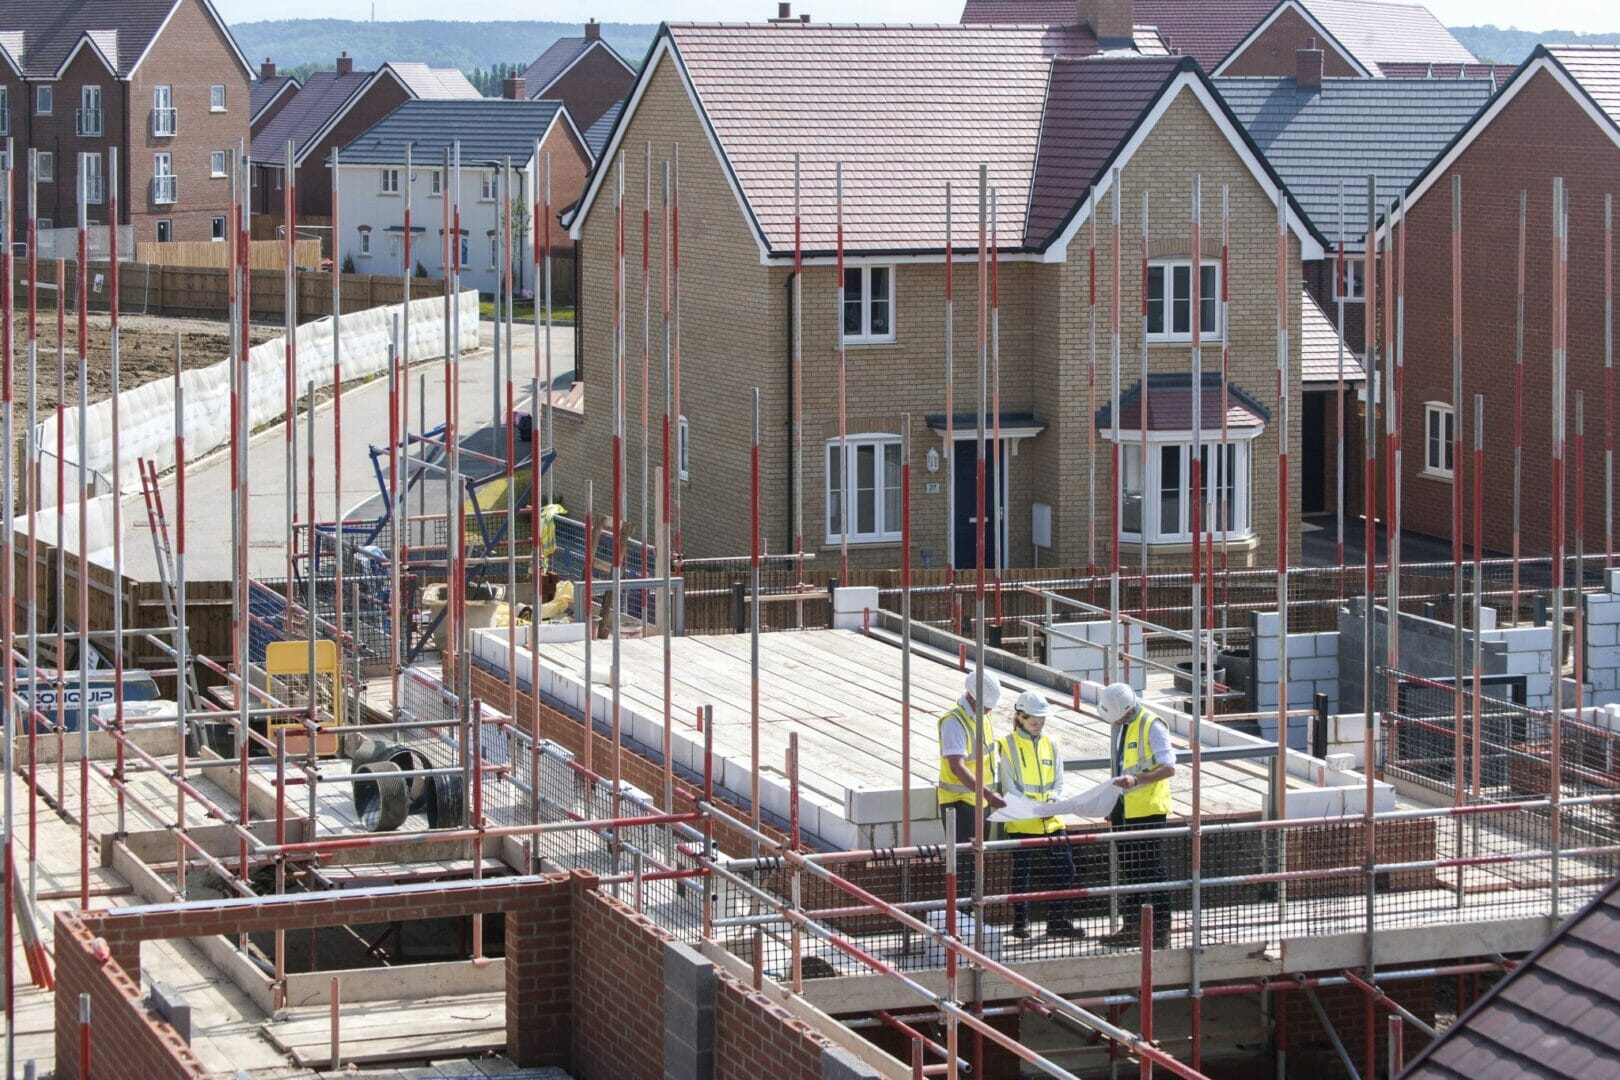 Strong housing growth in November, reports NHBC as new home levels top 15,000